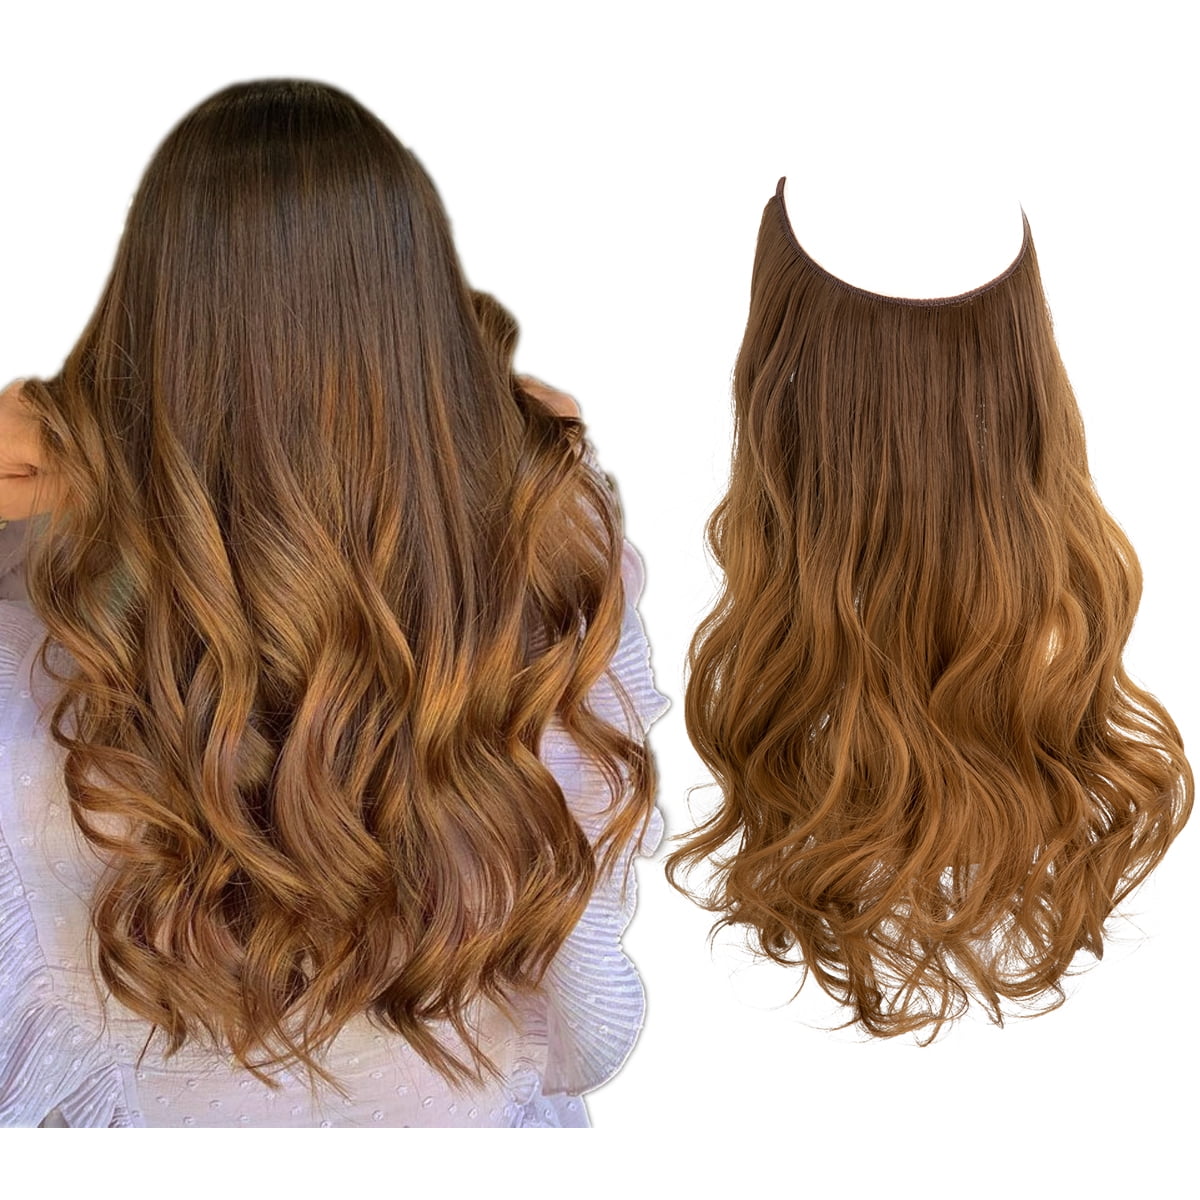 SARLA Invisible Wire Hair Extensions Long Wavy Curly Synthetic